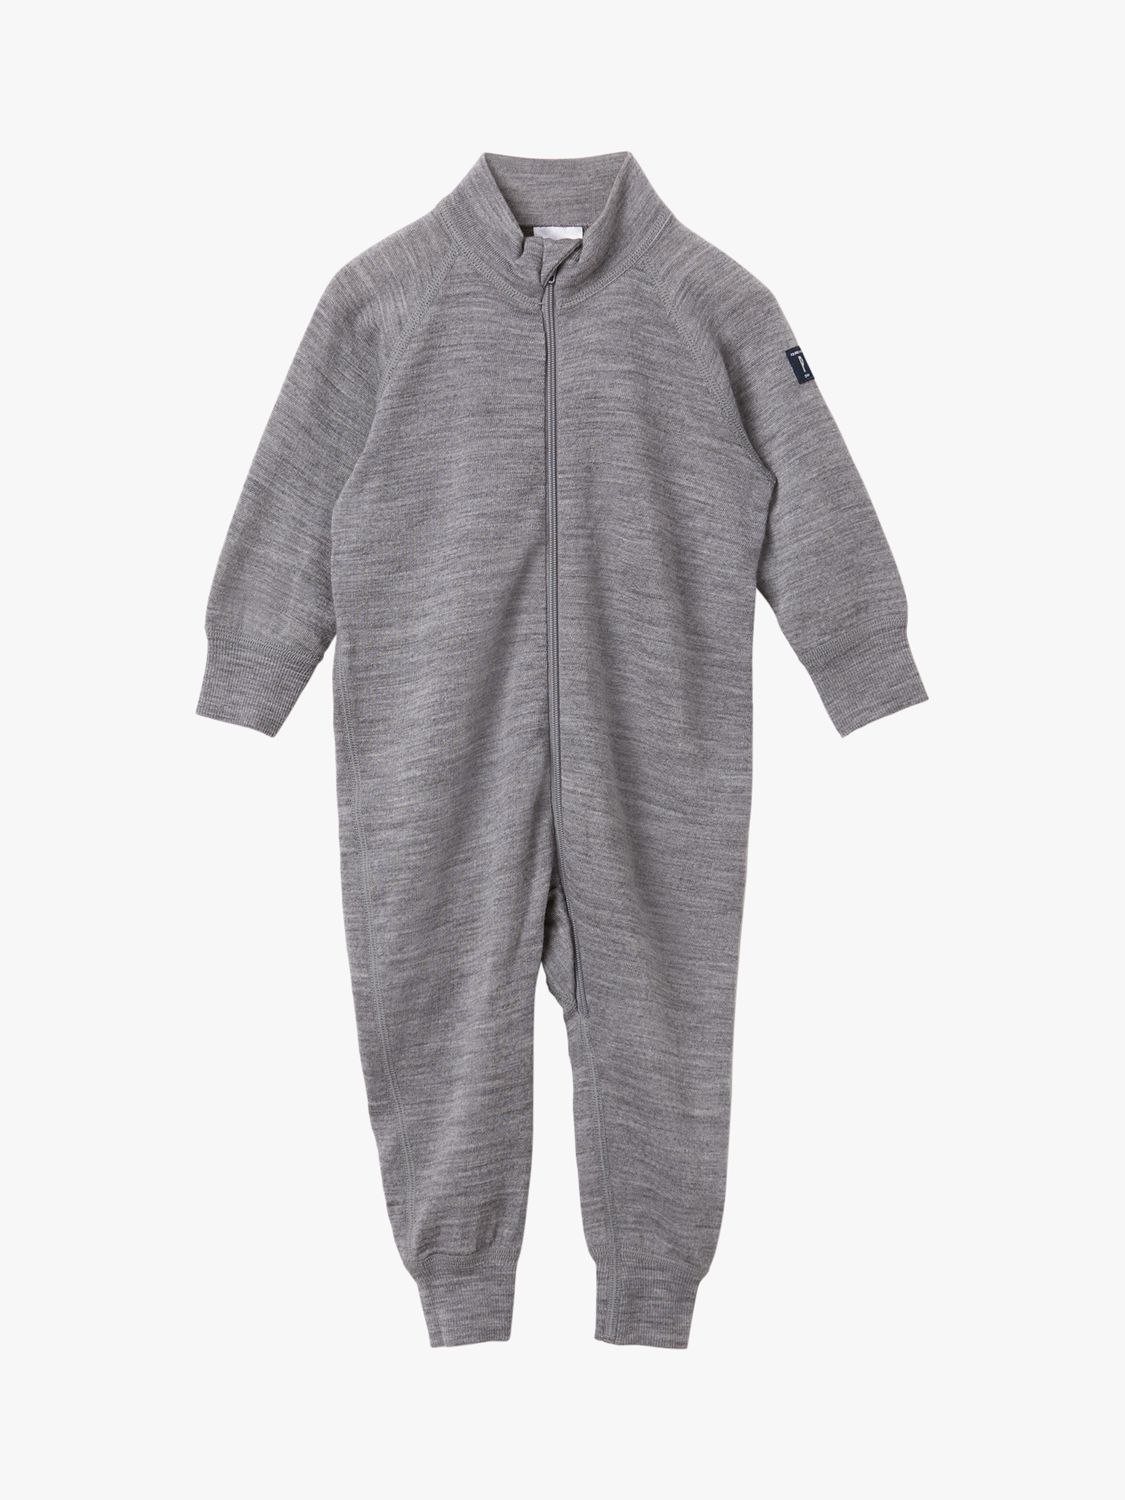 Polarn O. Pyret Baby Merino Wool Terry Overall Romper, Grey Marl, 1-2 months